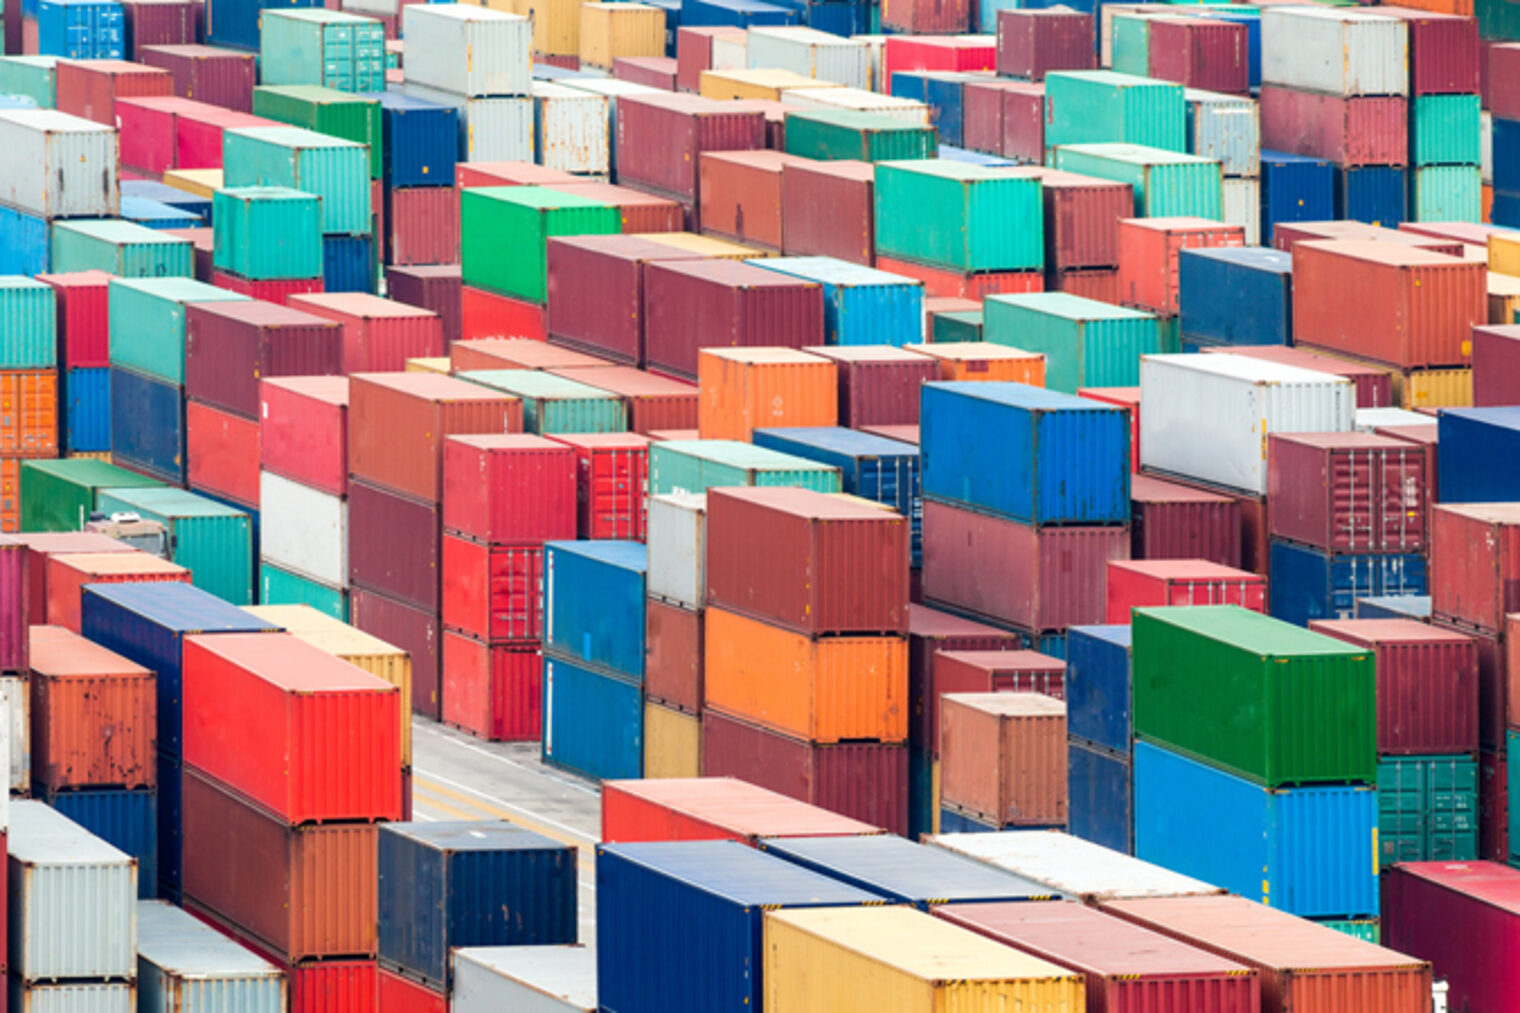 Container Hafen Export Umschlag 66723330 Fotolia eyetronic